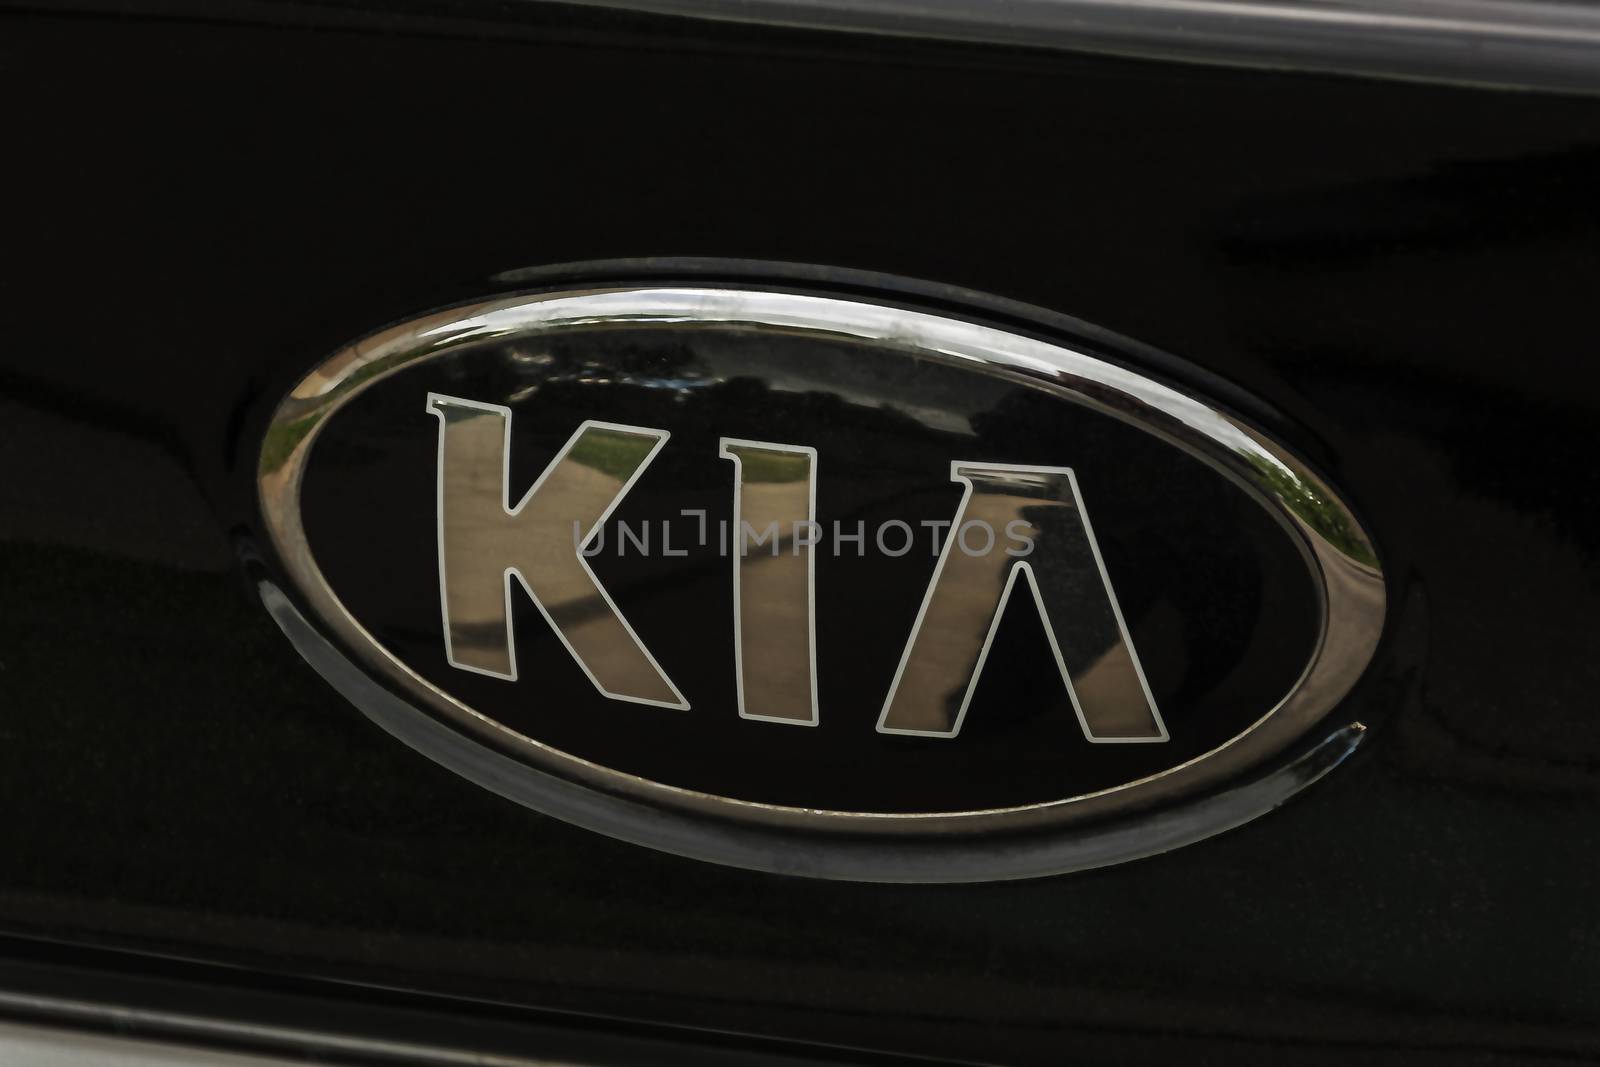 The logo of the Korean automotive company KIA on the boot lid by Grommik